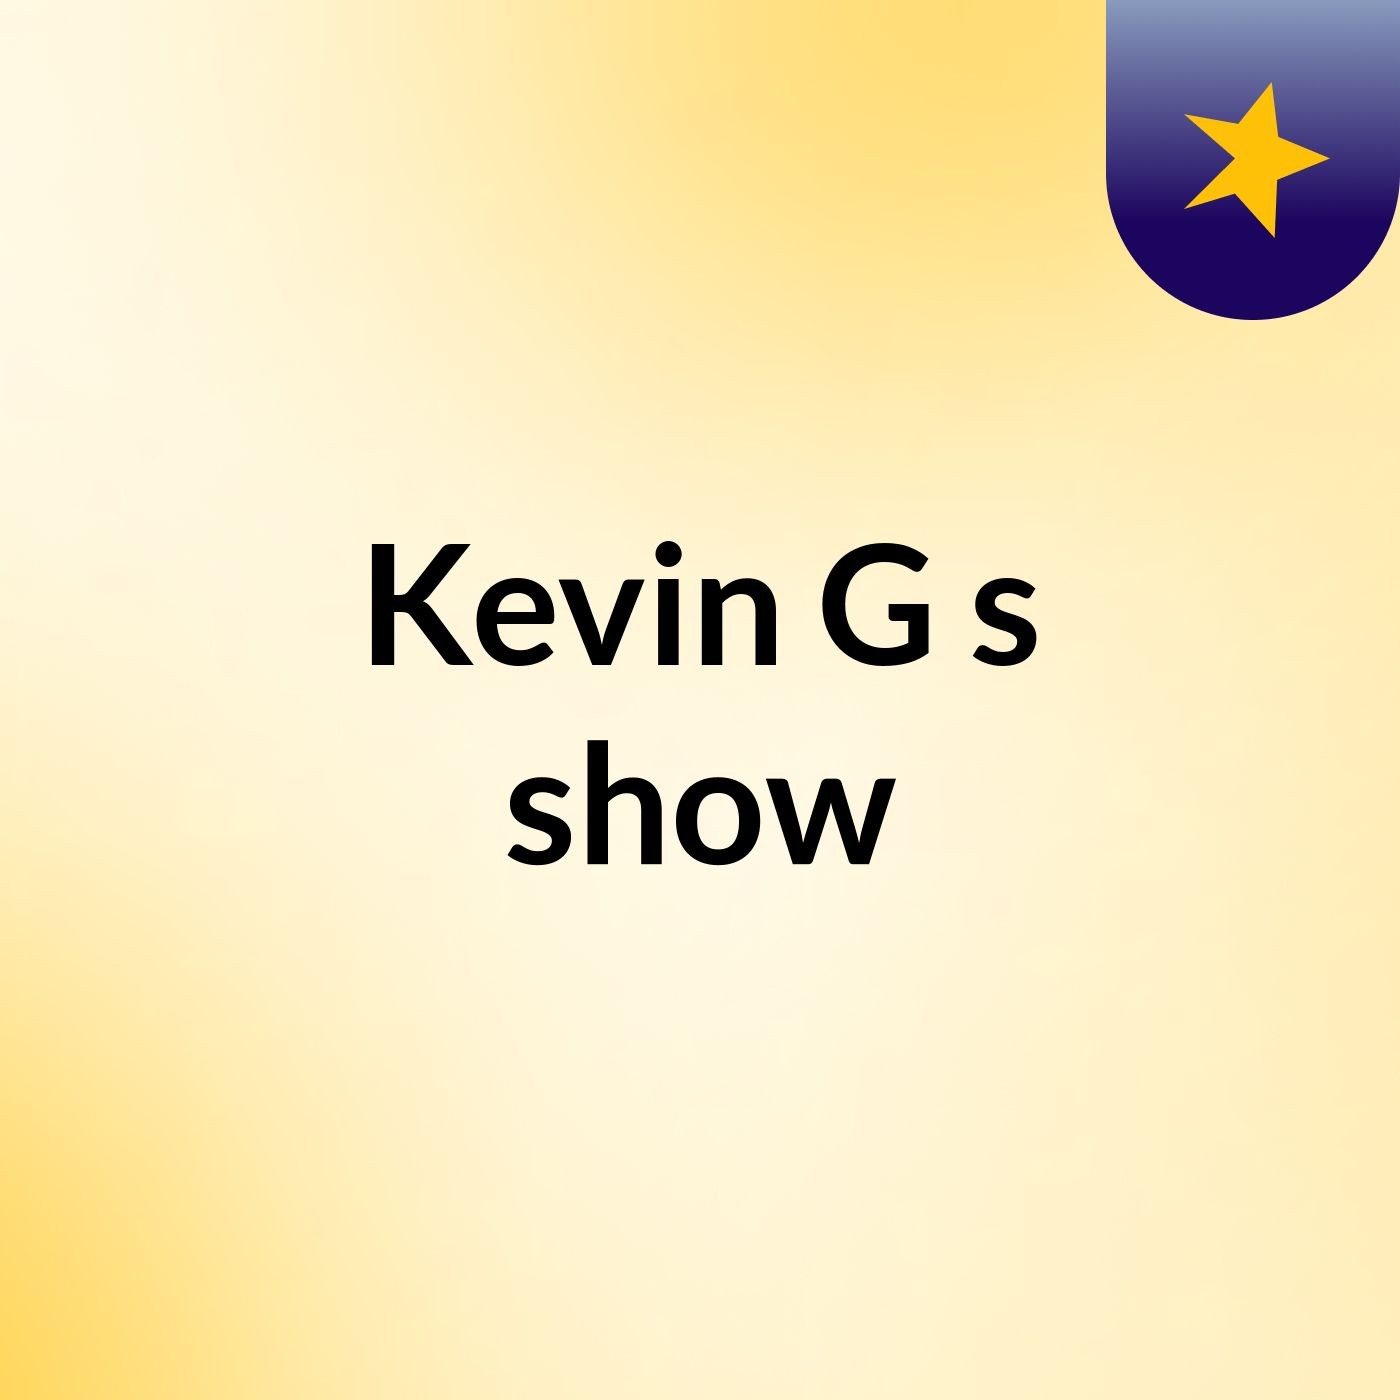 Kevin G's show